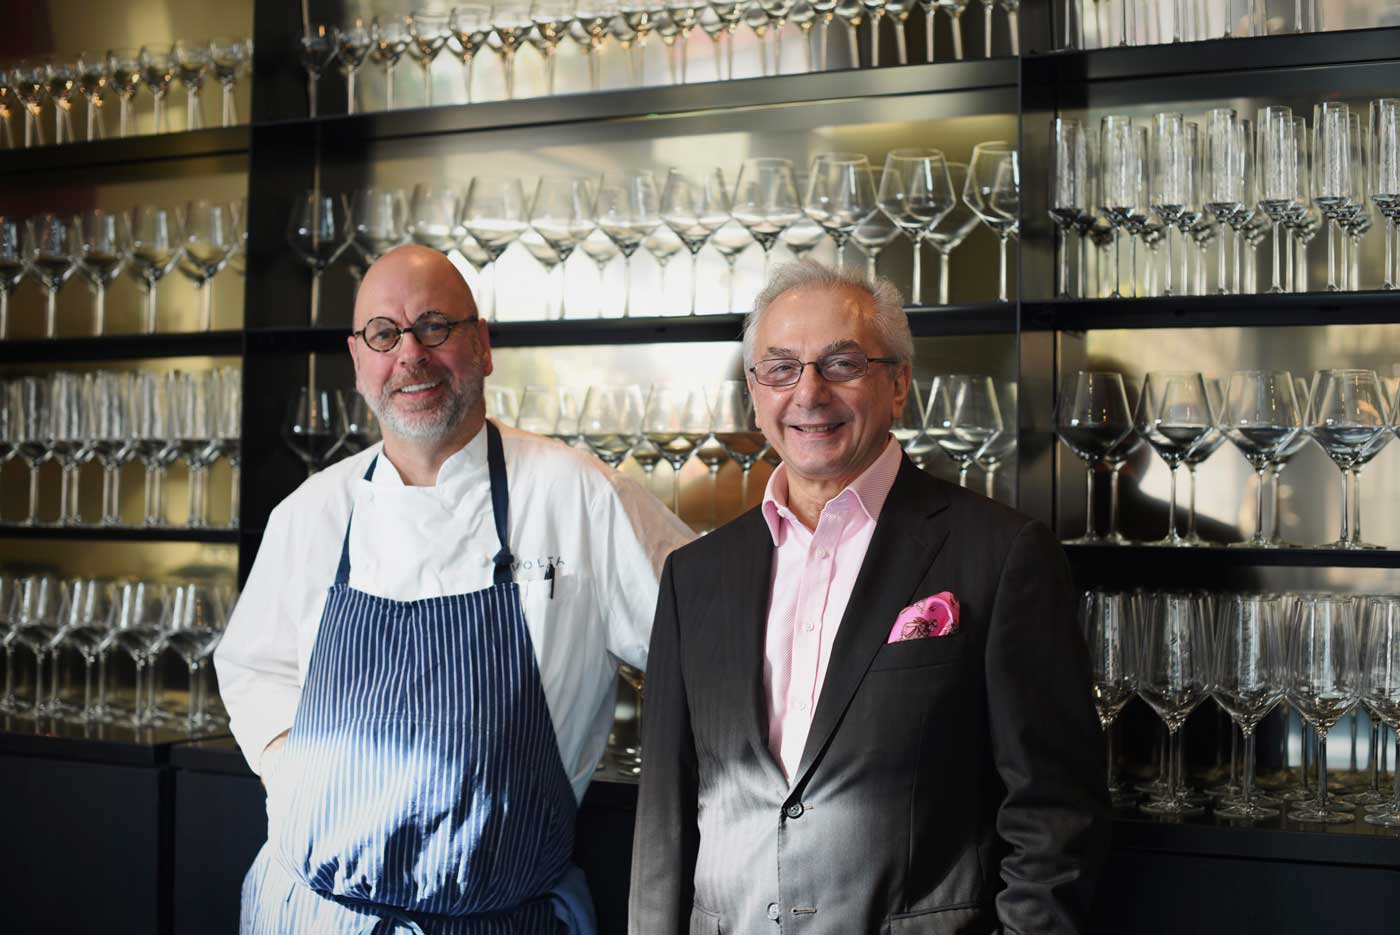 Chef Staffan Terje and Umberto Gibin stand by the wall of wine glasses at Volta.